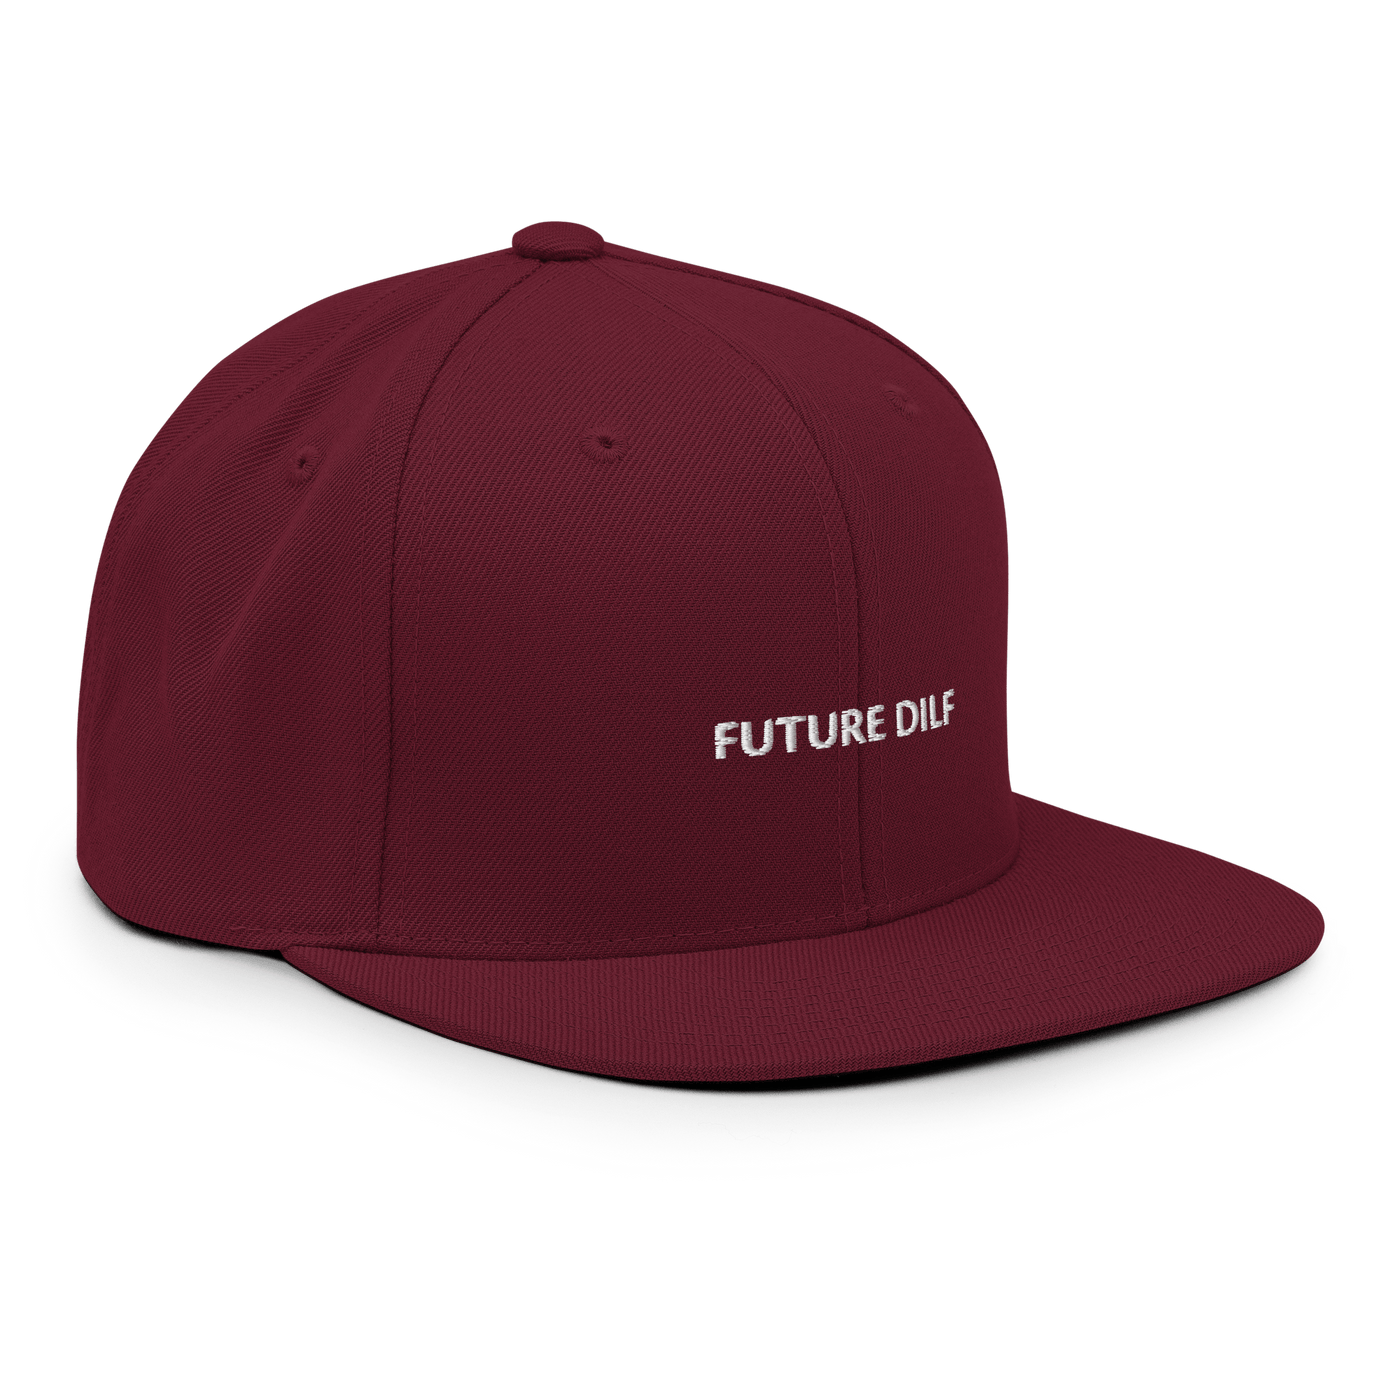 Future Dilf Snapback - Maroon - - Just Another Cap Store